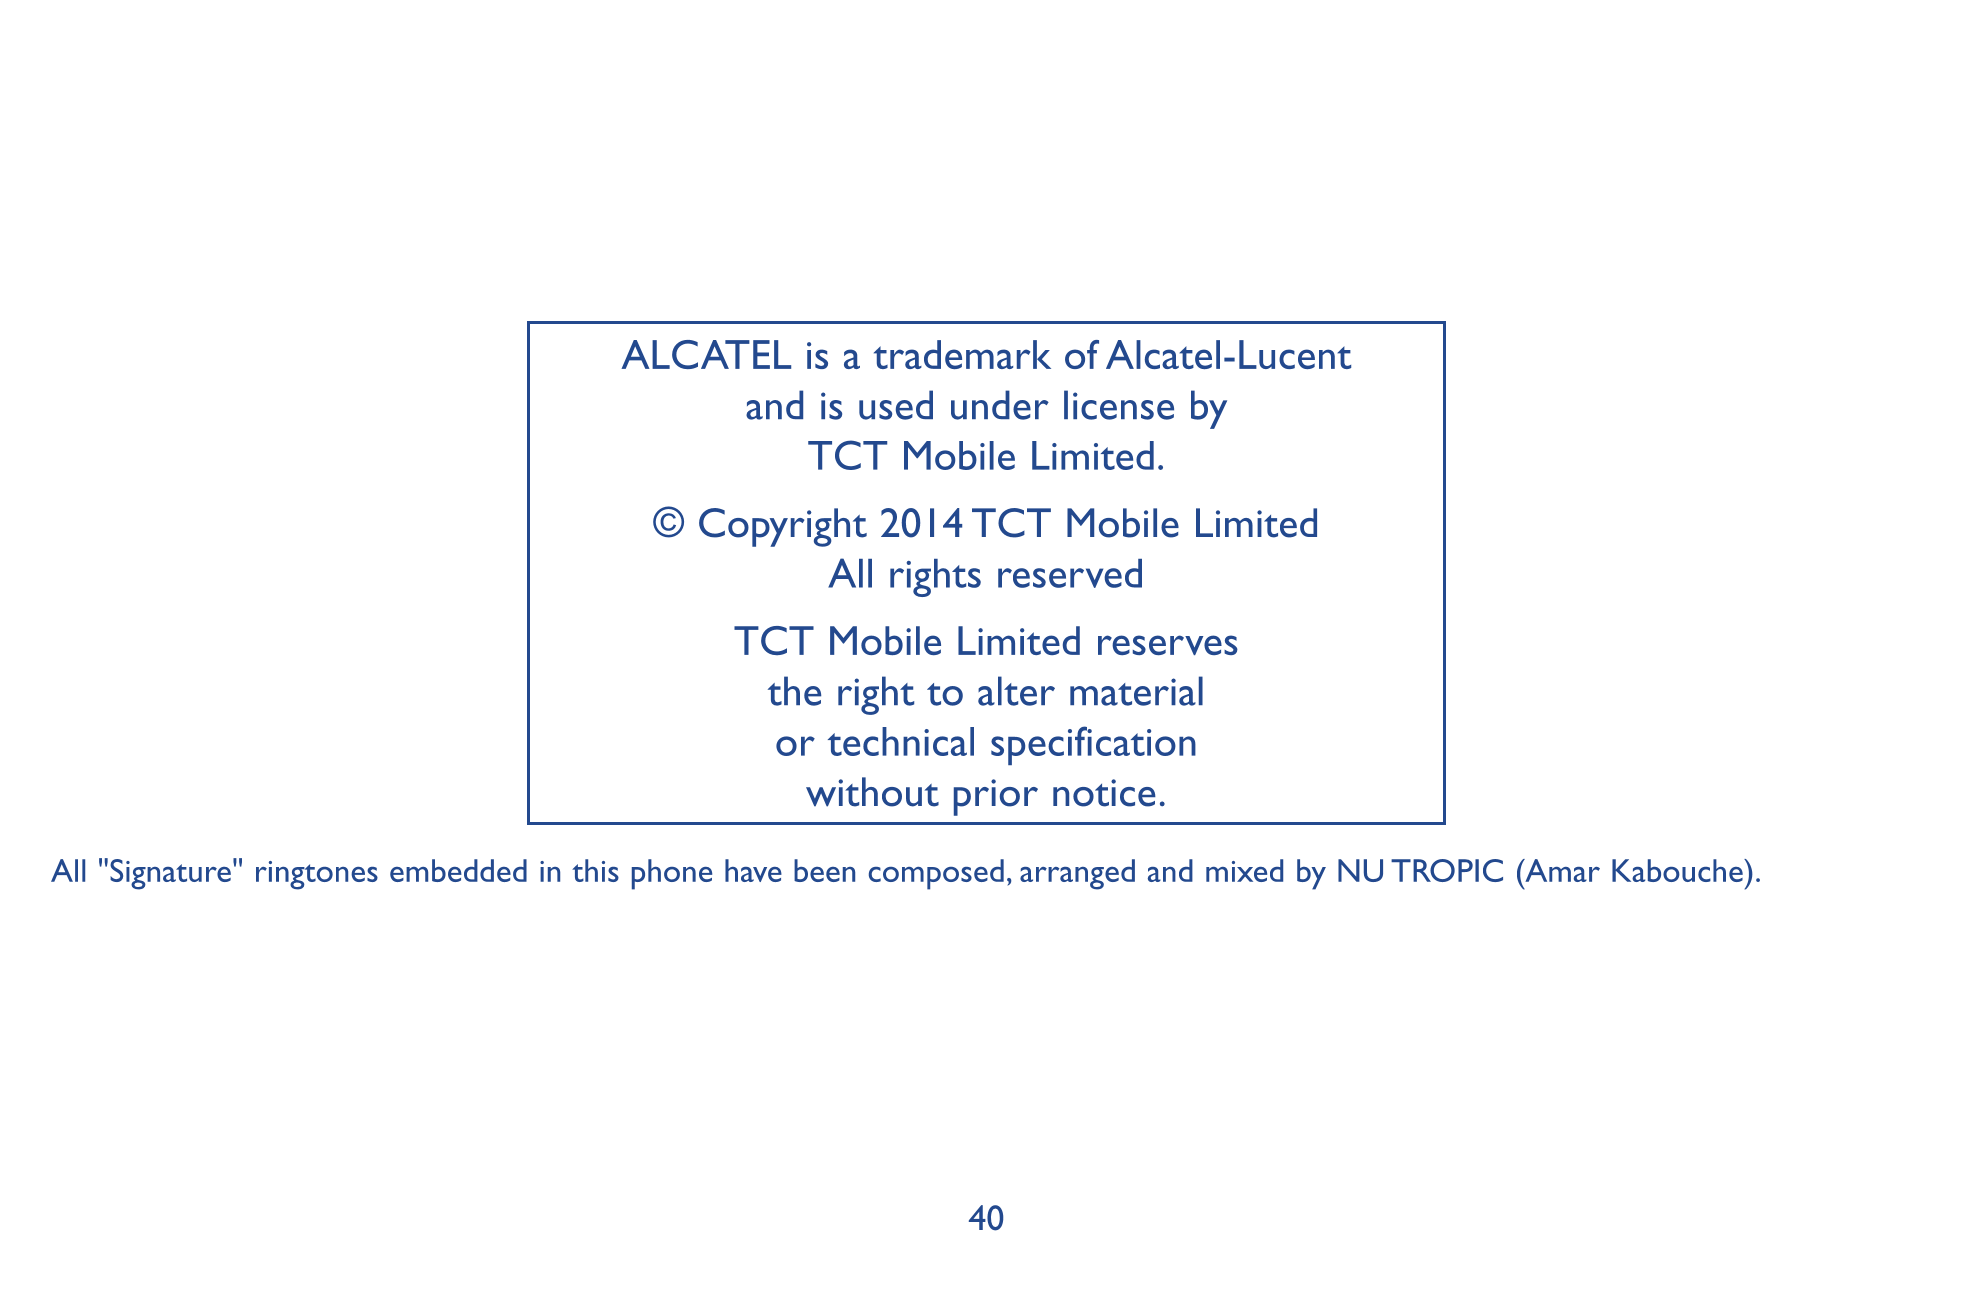 ALCATEL is a trademark of Alcatel-Lucent 
and is used under license by   
TCT Mobile Limited.
© Copyright 2014 TCT Mobile Limite